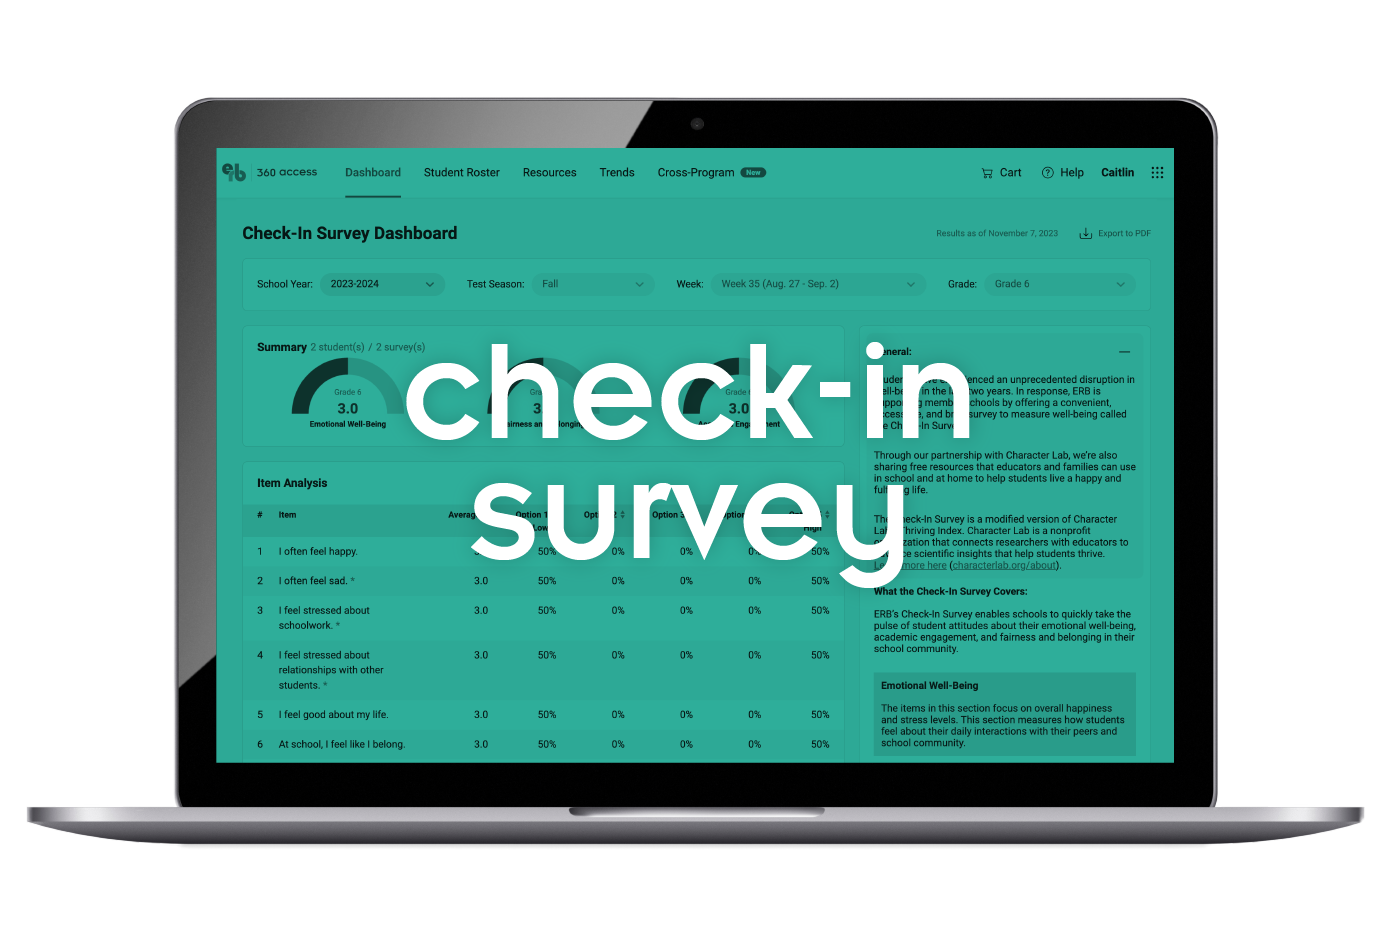 Check-in Survey